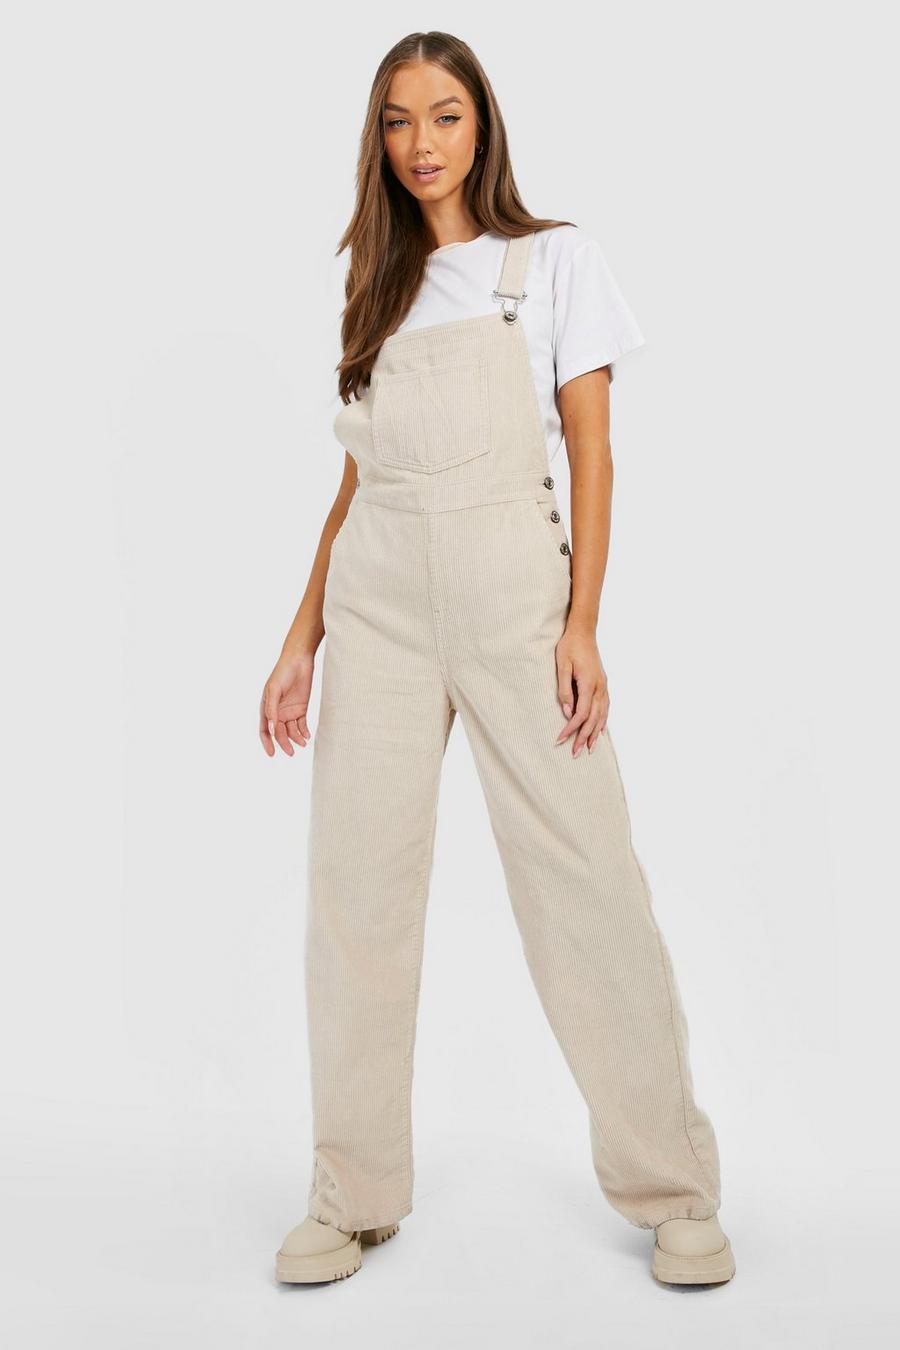 RELA RELA Tie Strap Culotte Dungarees Loose Casual Jumpsuit High Waist Trousers 